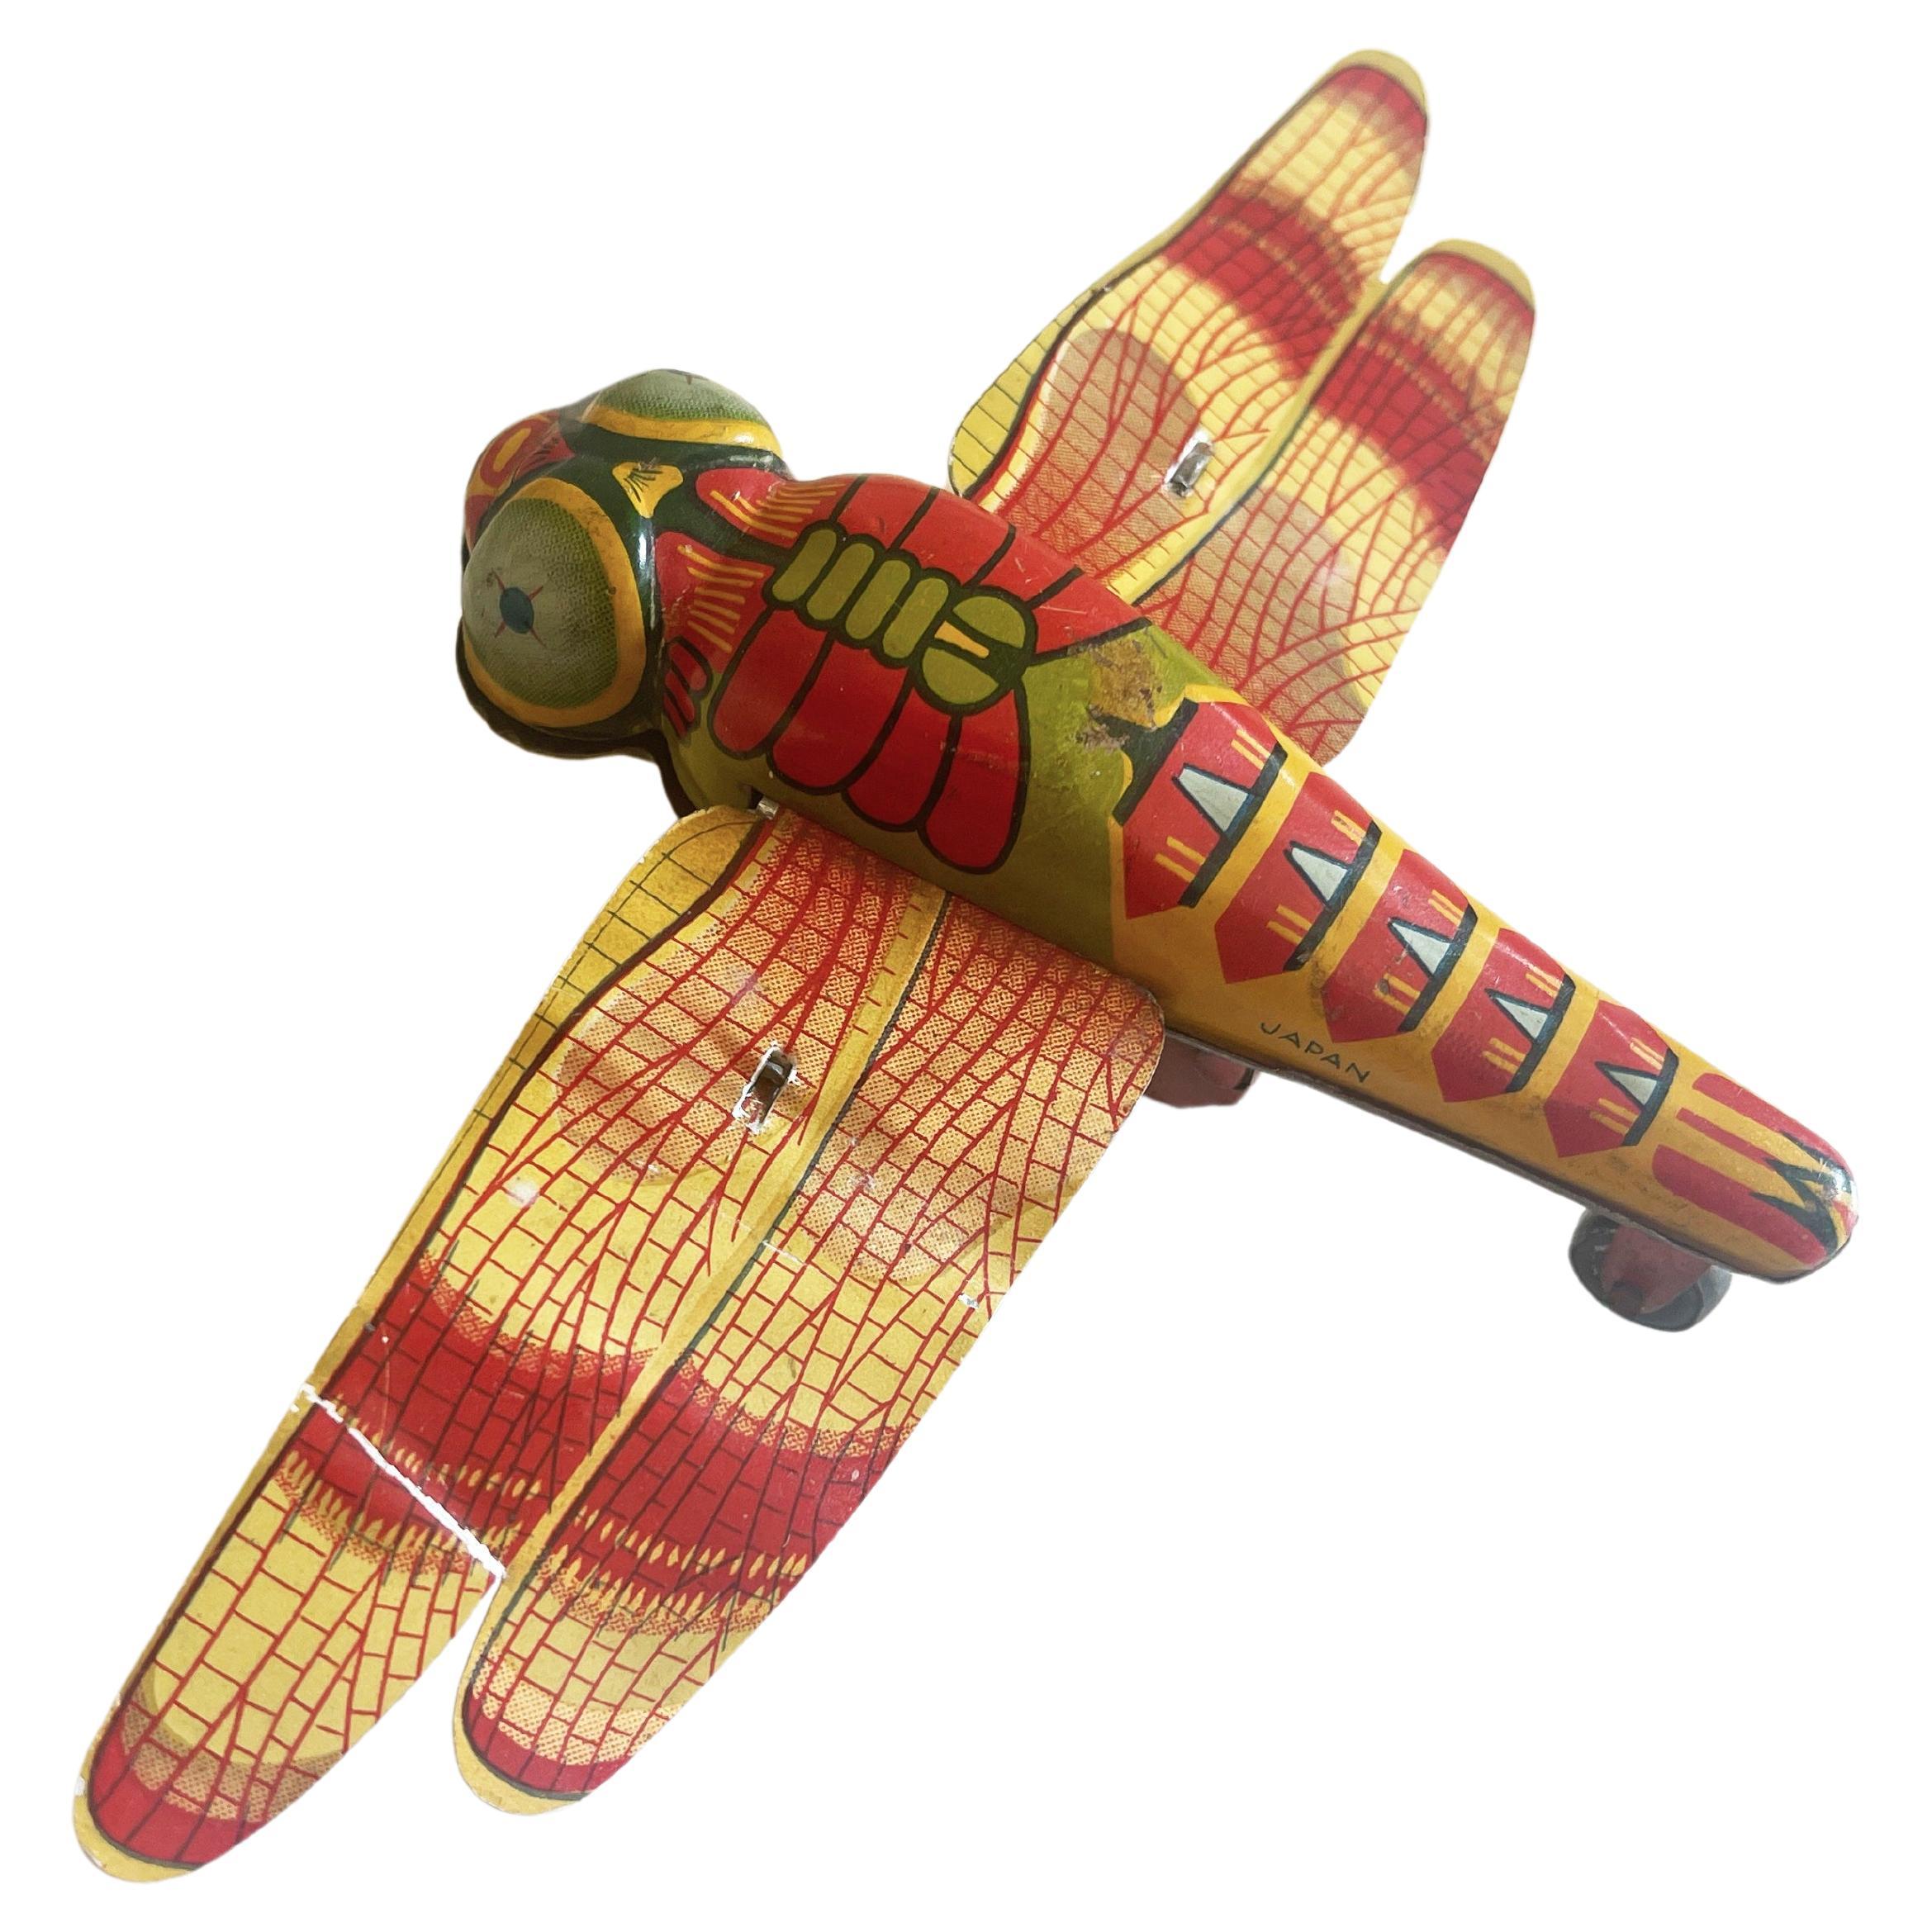 Vintage Japanese Litho Wind-up Tin Toy Dragonfly 1940's to 1950's, Japan